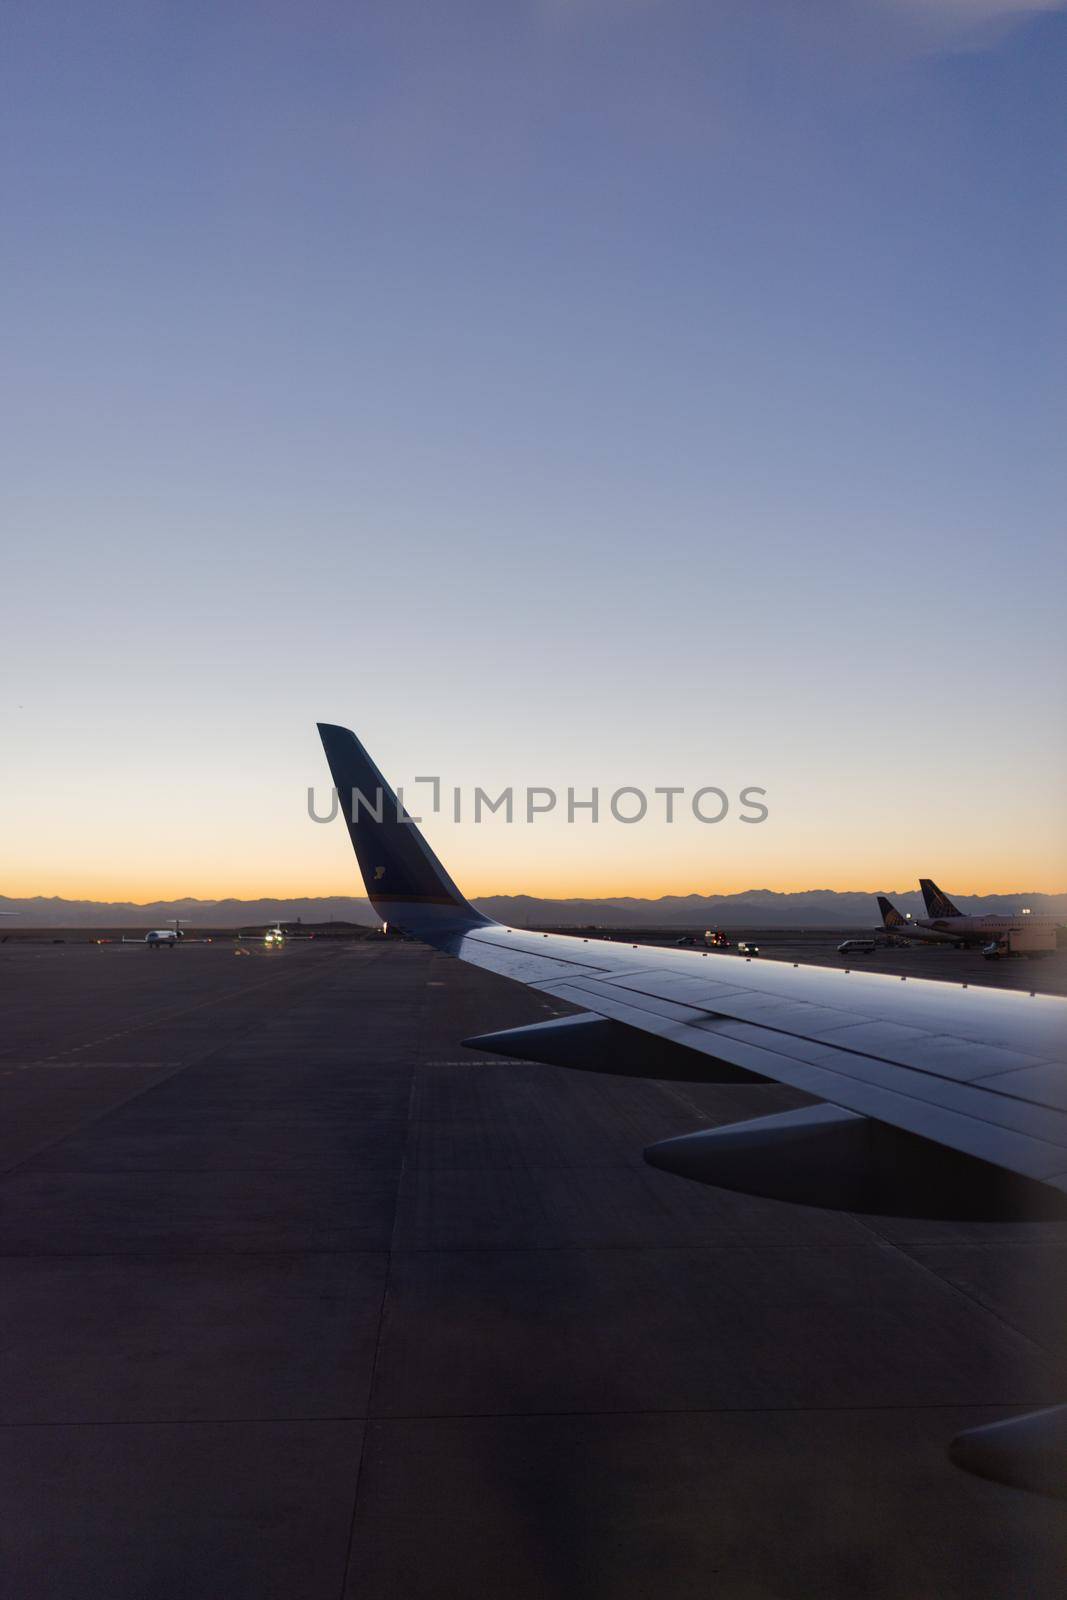 Astonishing view of clear dawn sky above planes parked in airport. Beautiful view of bright sunrise skyline from behind an airplane wing. Transportation and landscapes